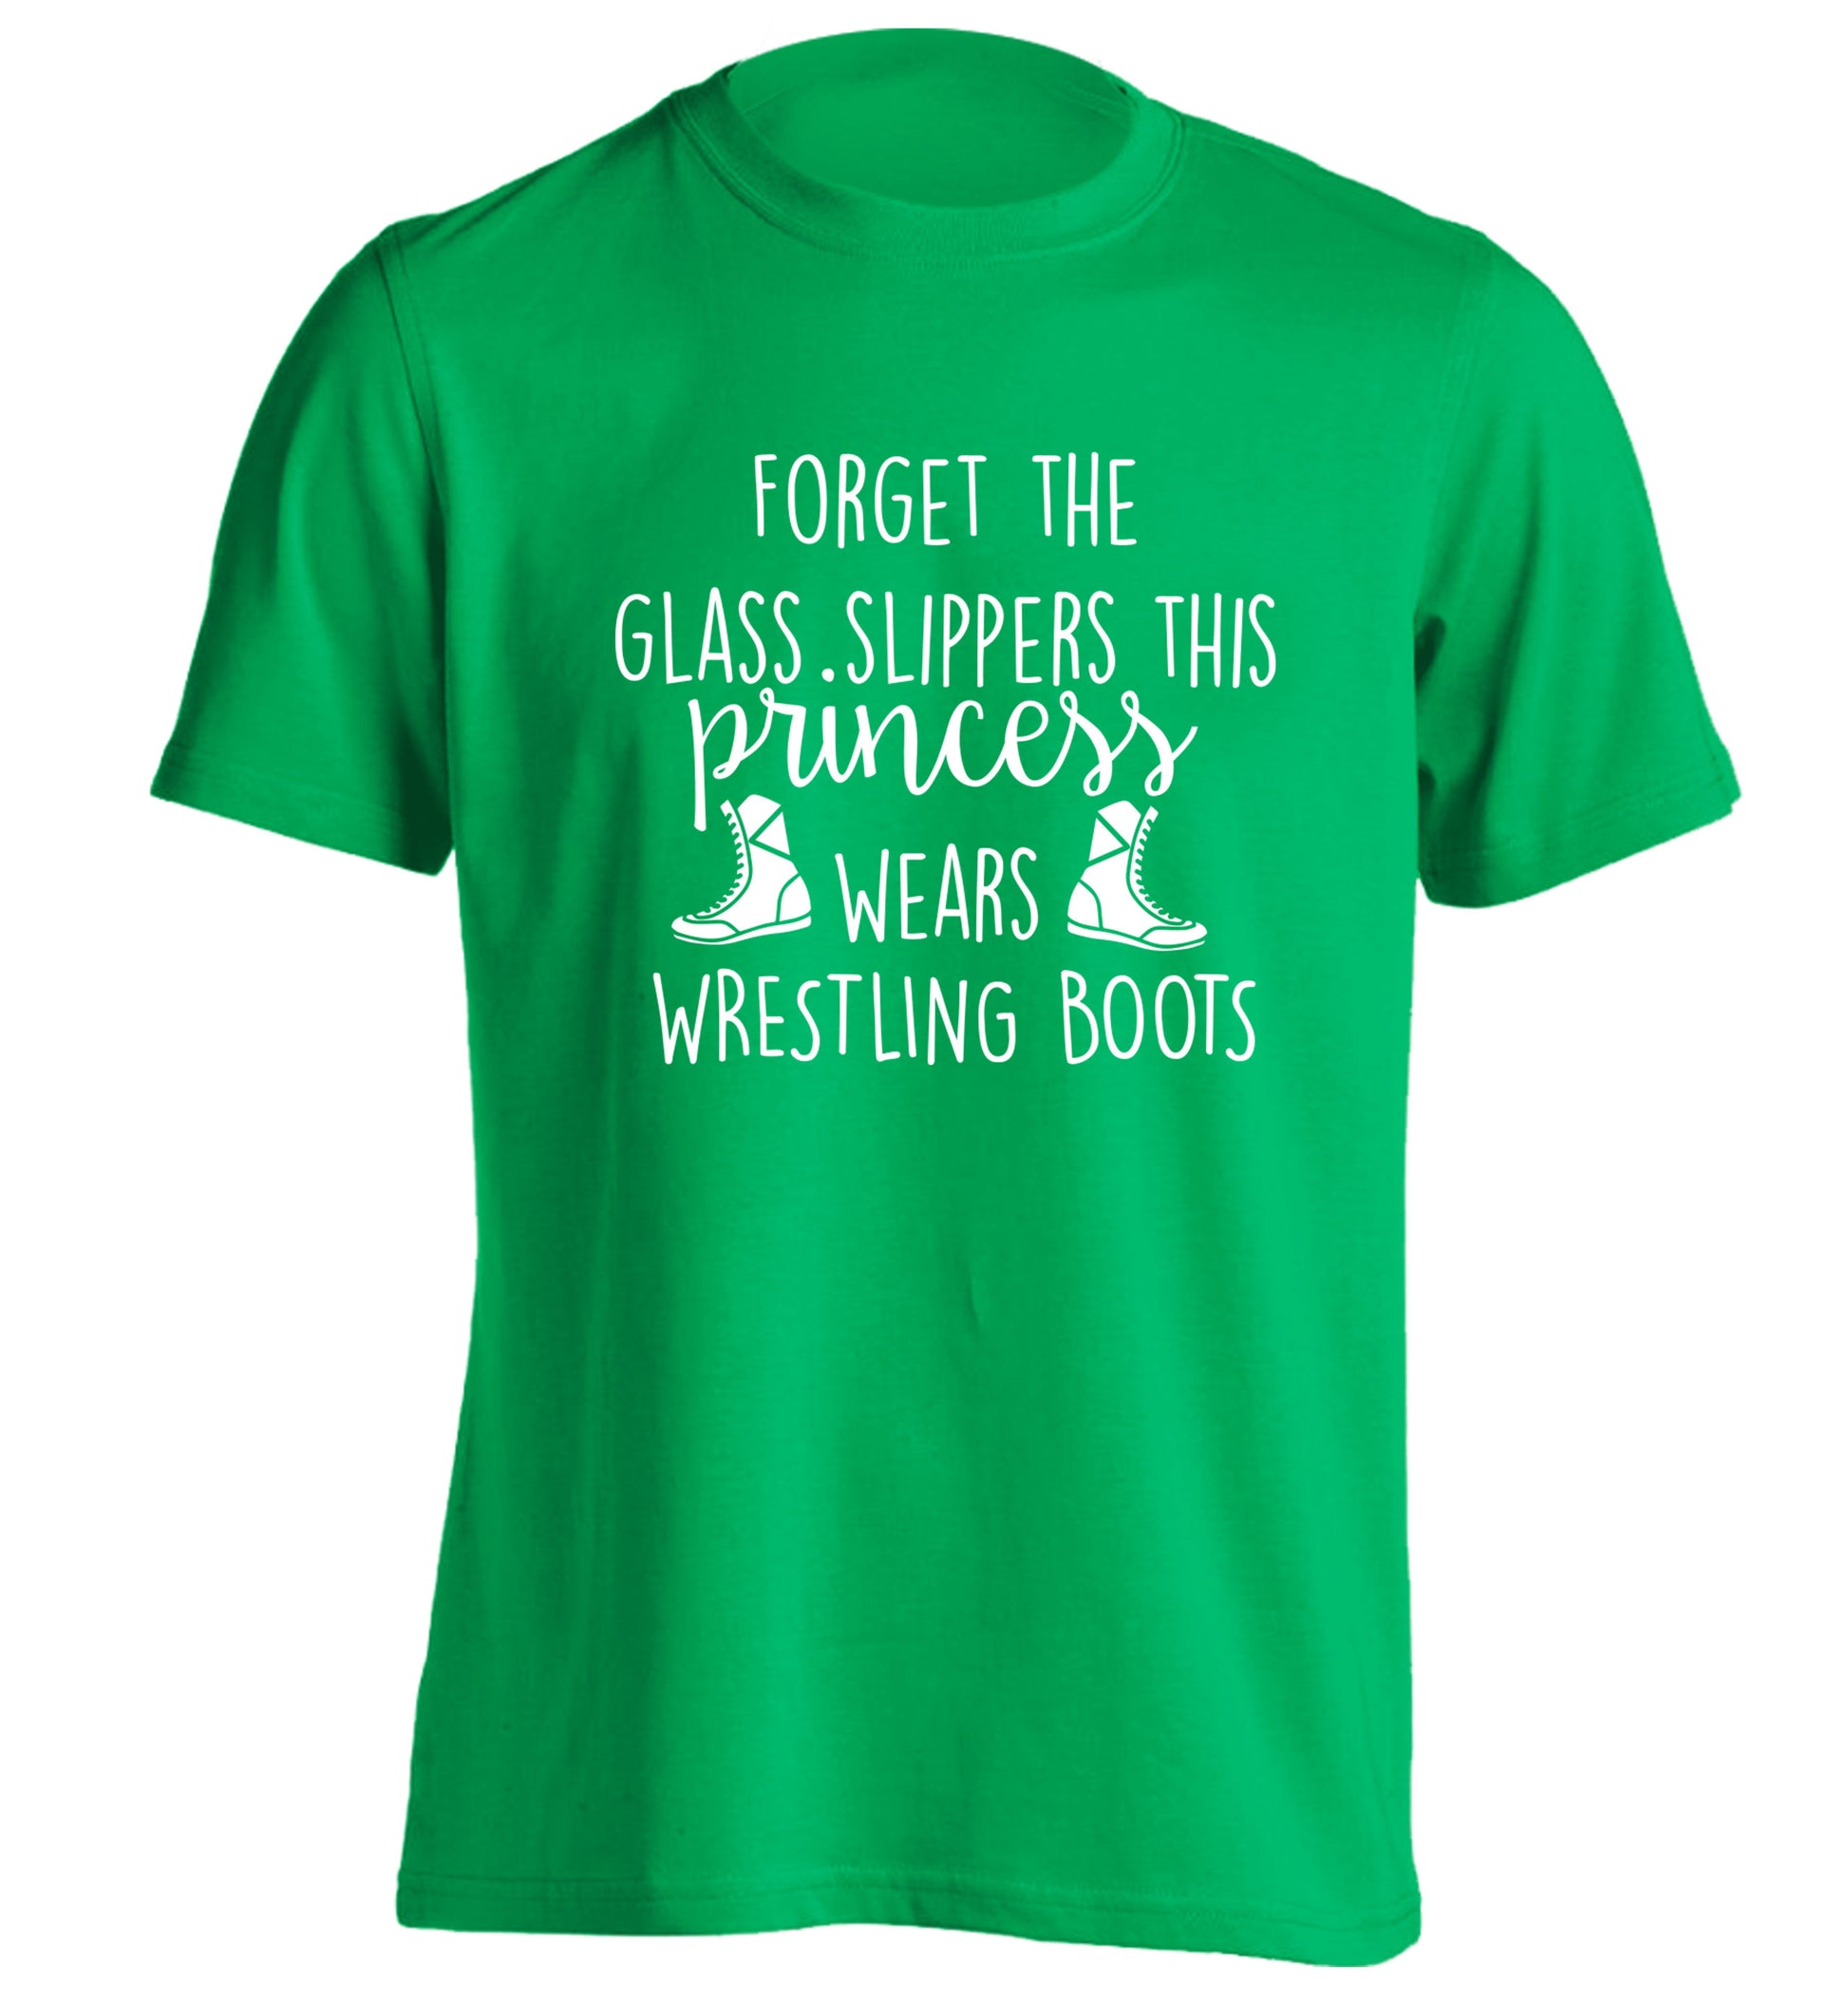 Forget the glass slippers this princess wears wrestling boots adults unisex green Tshirt 2XL